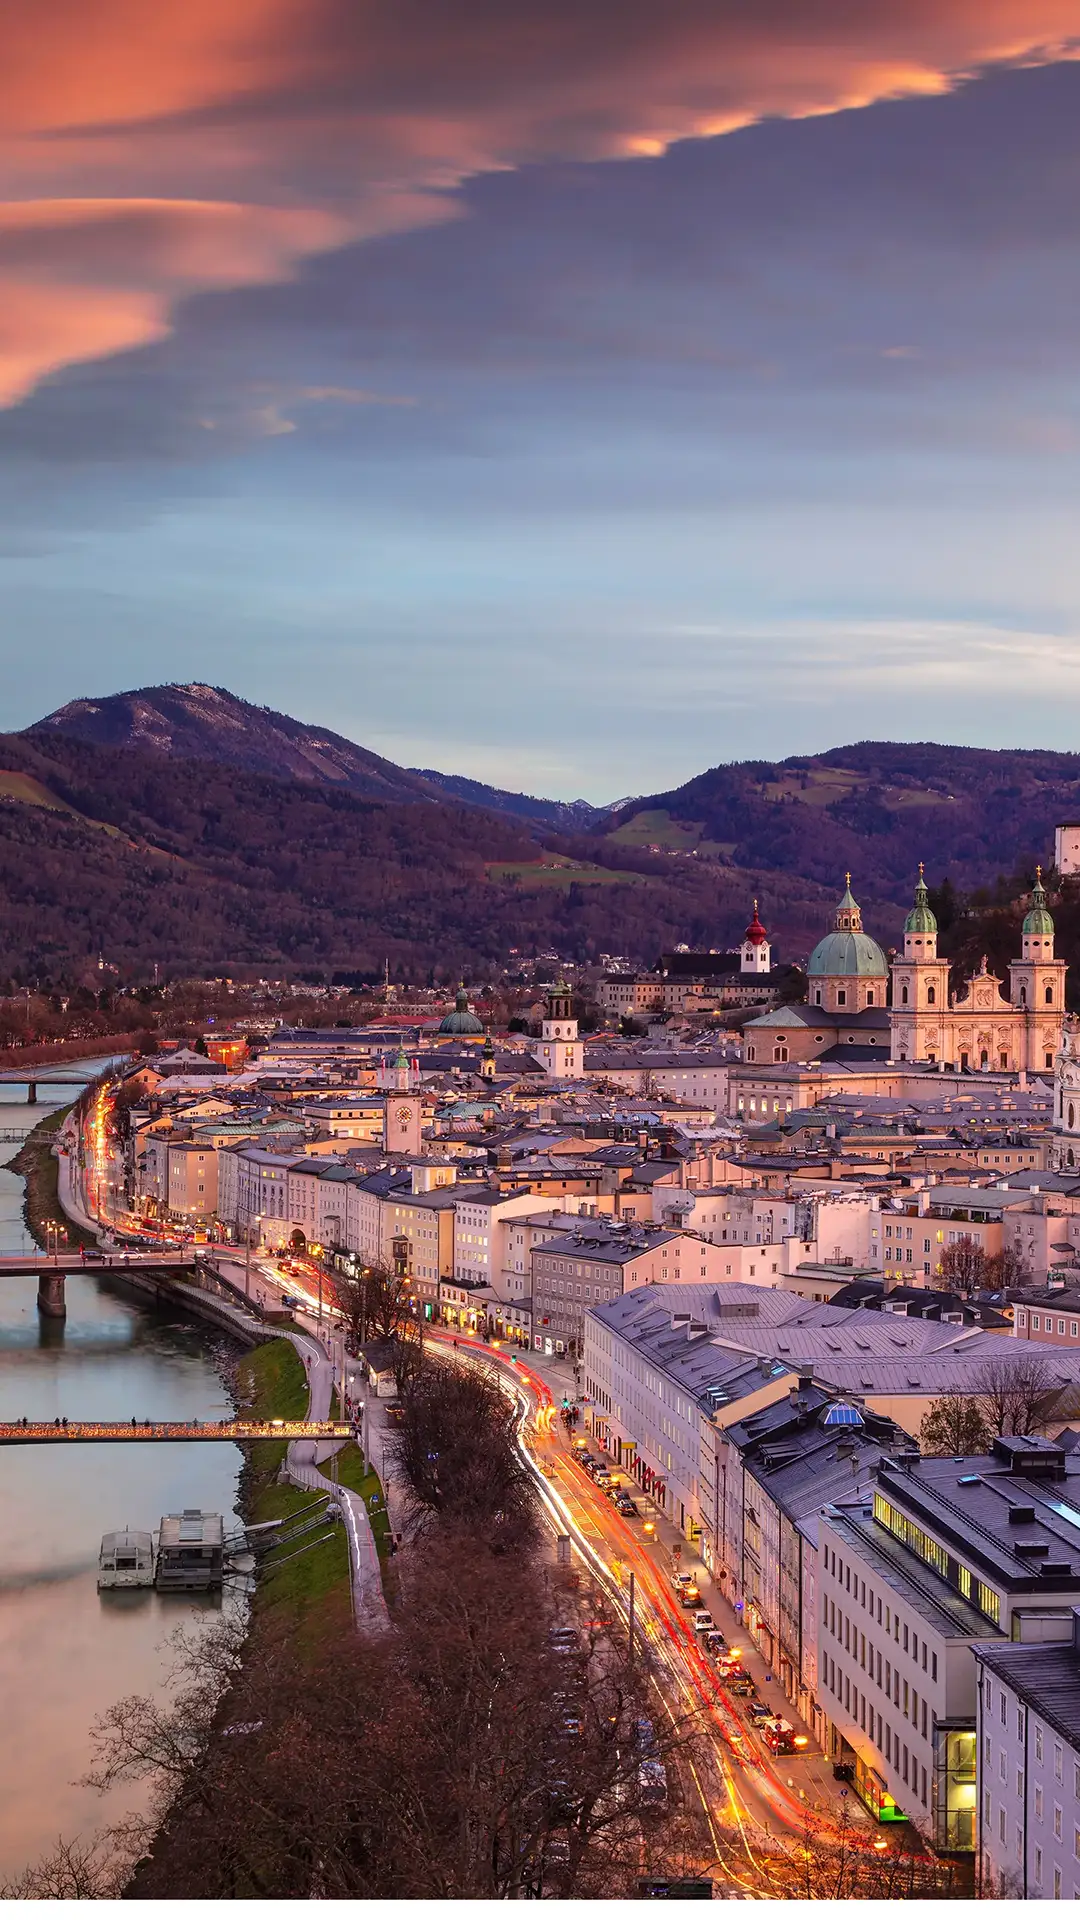 Image of Salzburg, Austria with Salzburg Cathedral during beautiful winter sunset.